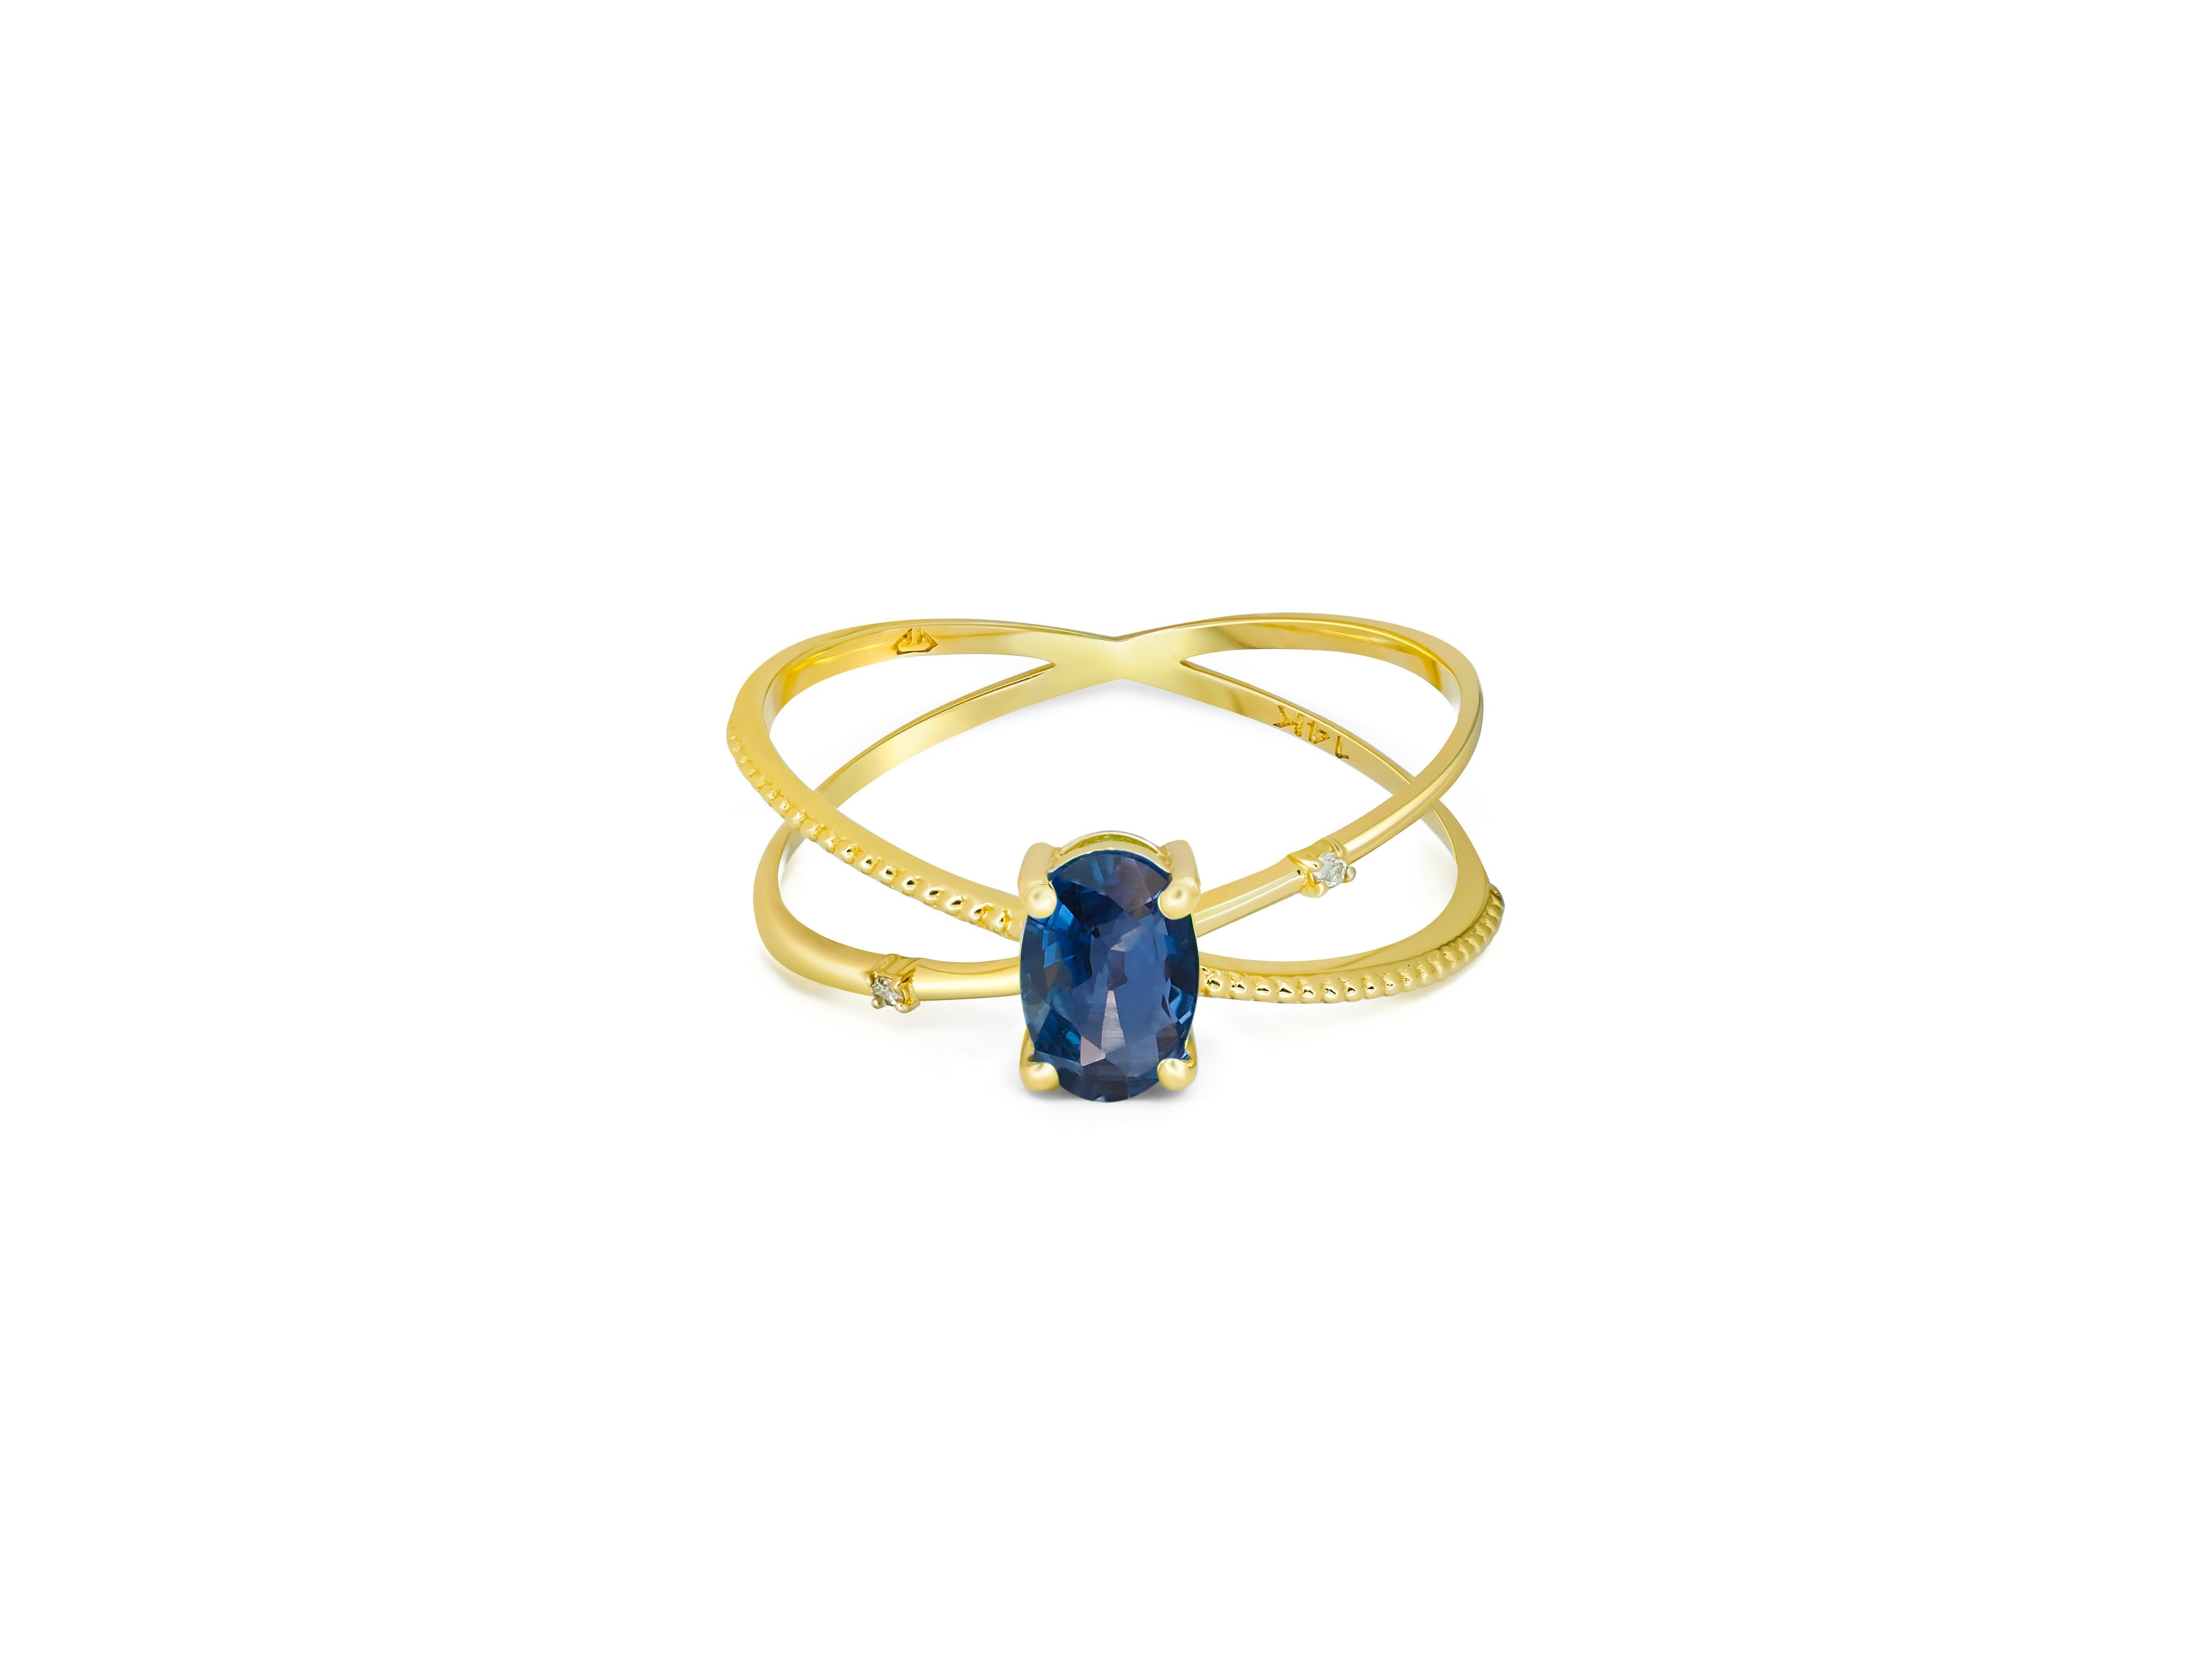 14k gold ring with oval sapphire. 
Blue gemstone ring. September birthstone ring. Genuine sapphire ring. Vintage ring. Twist gold band.

Metal: 14k gold
Weight: 1.9 g. depends from size.
 
Main Stone: Sapphire
Shape: Oval  
Total Carat Weight: aprox